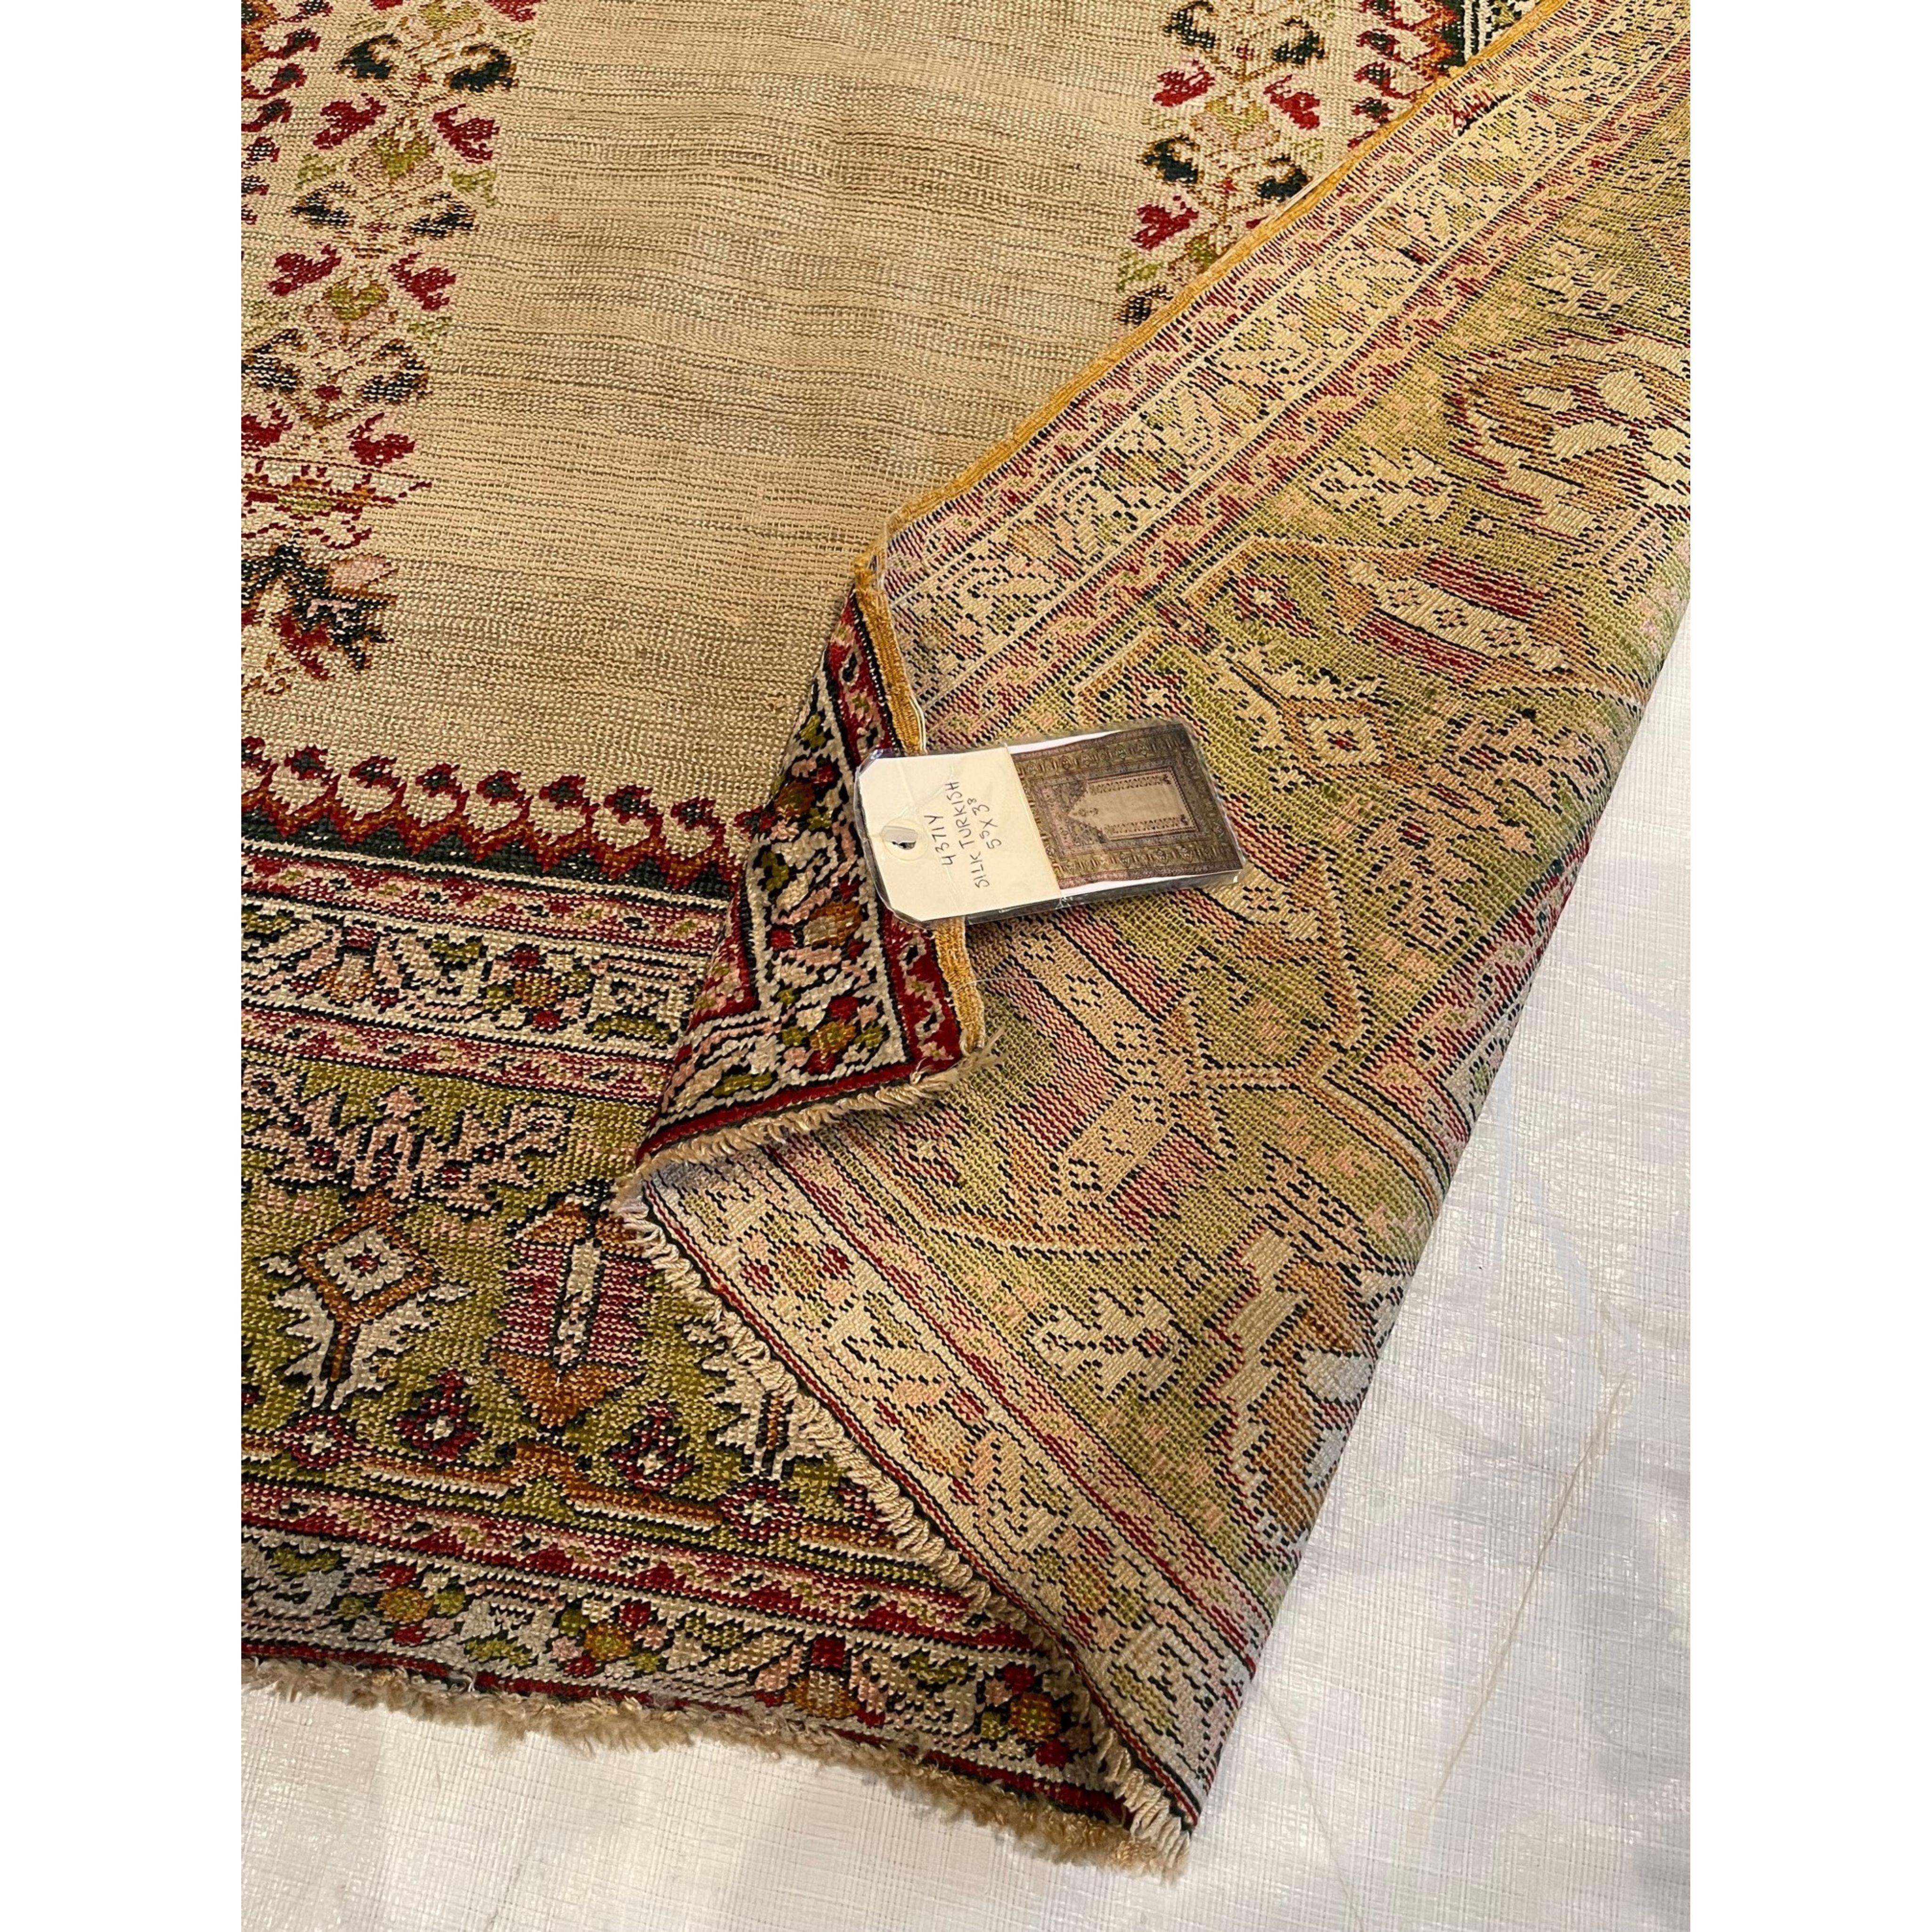 Other Antique Silk Turkish Rug 5.5x3.8 For Sale